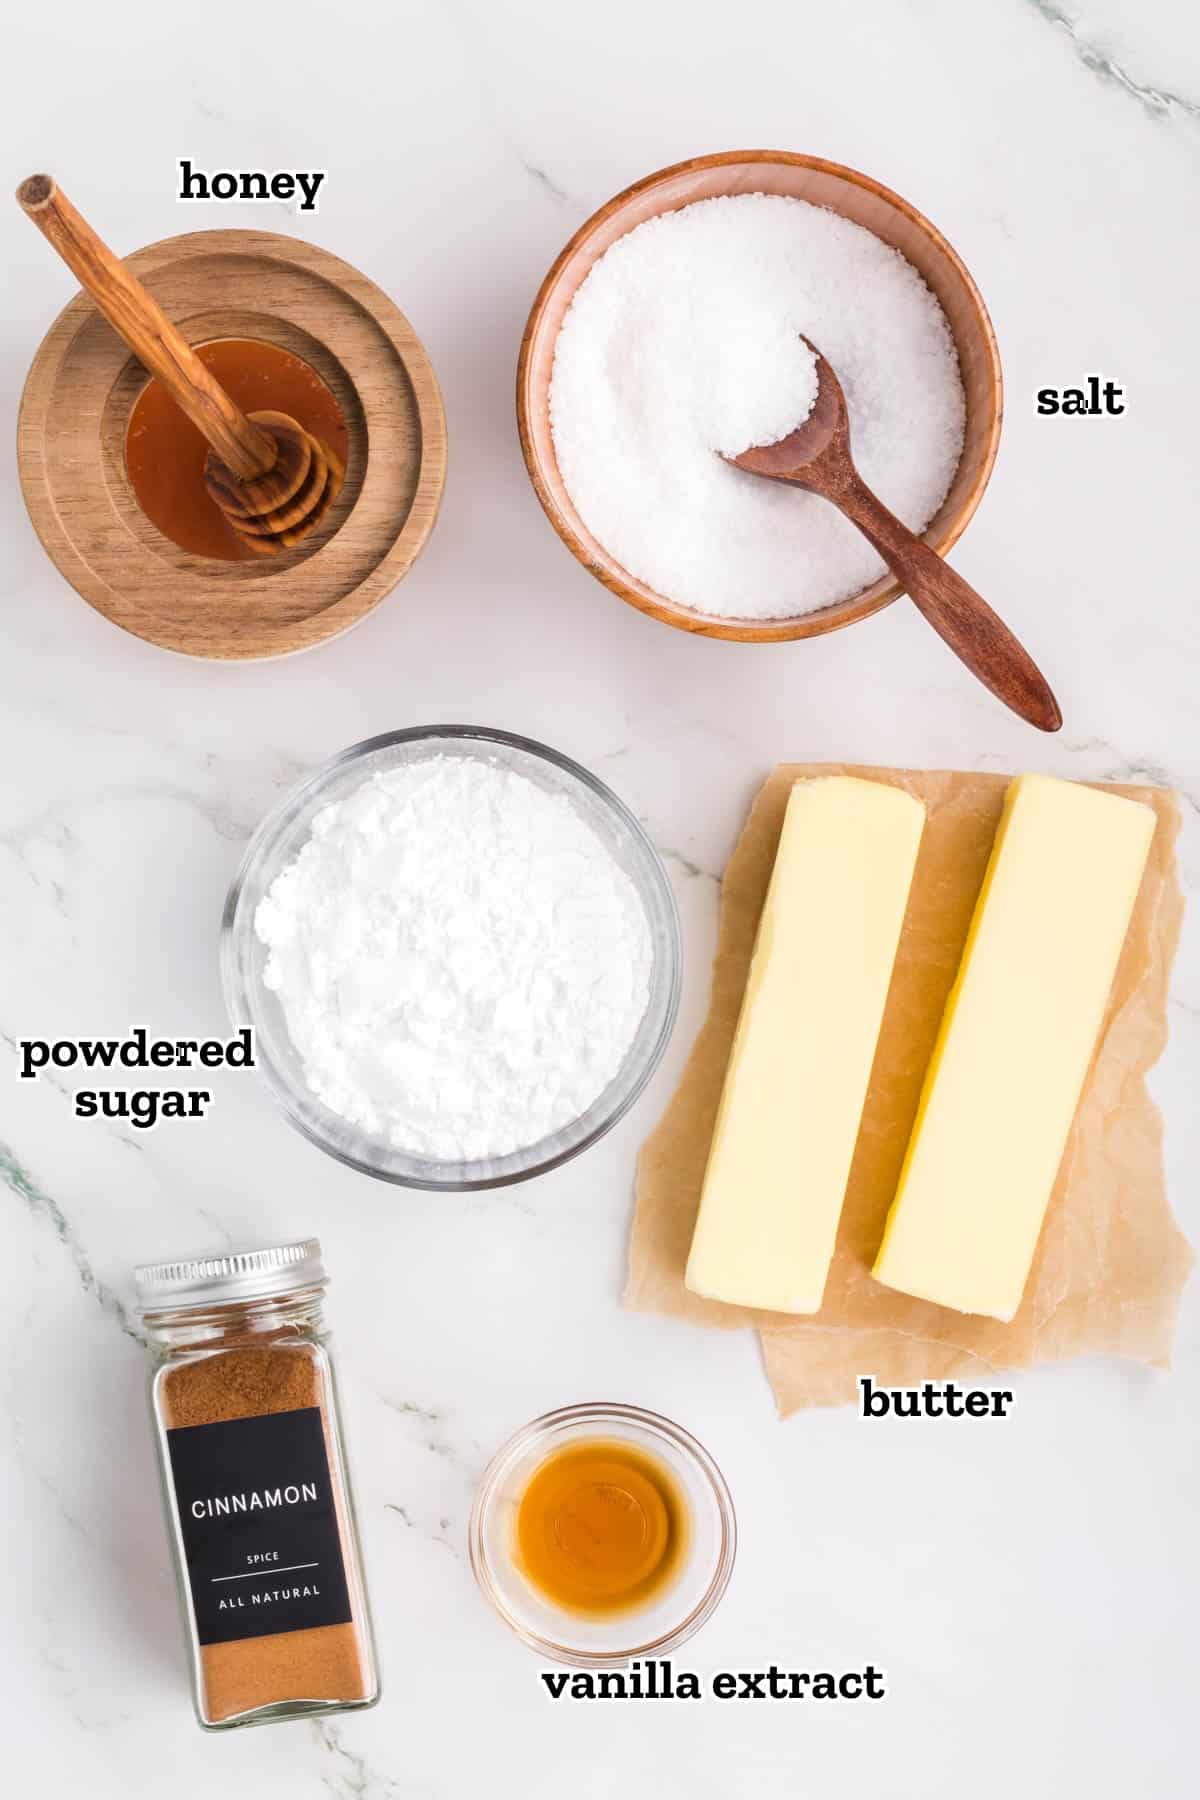 A labeled image of ingredients needed to make cinnamon honey butter.